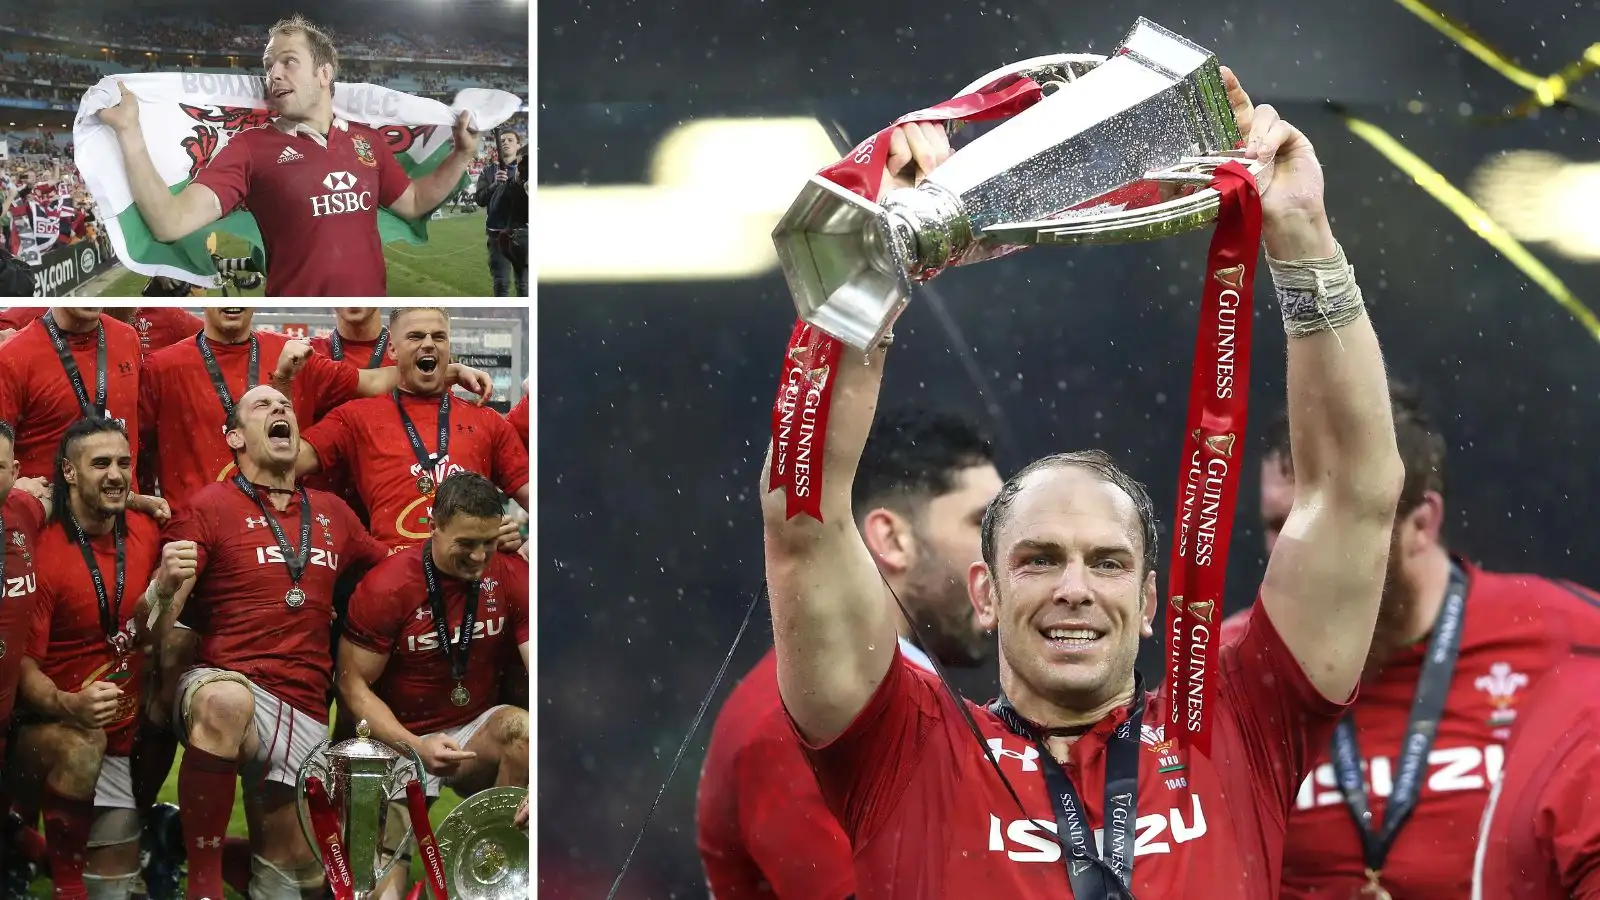 Wales and British and Irish Lions great Alun Wyn Jones has shockingly announced his retirement from international rugby ahead of the Rugby World Cup.